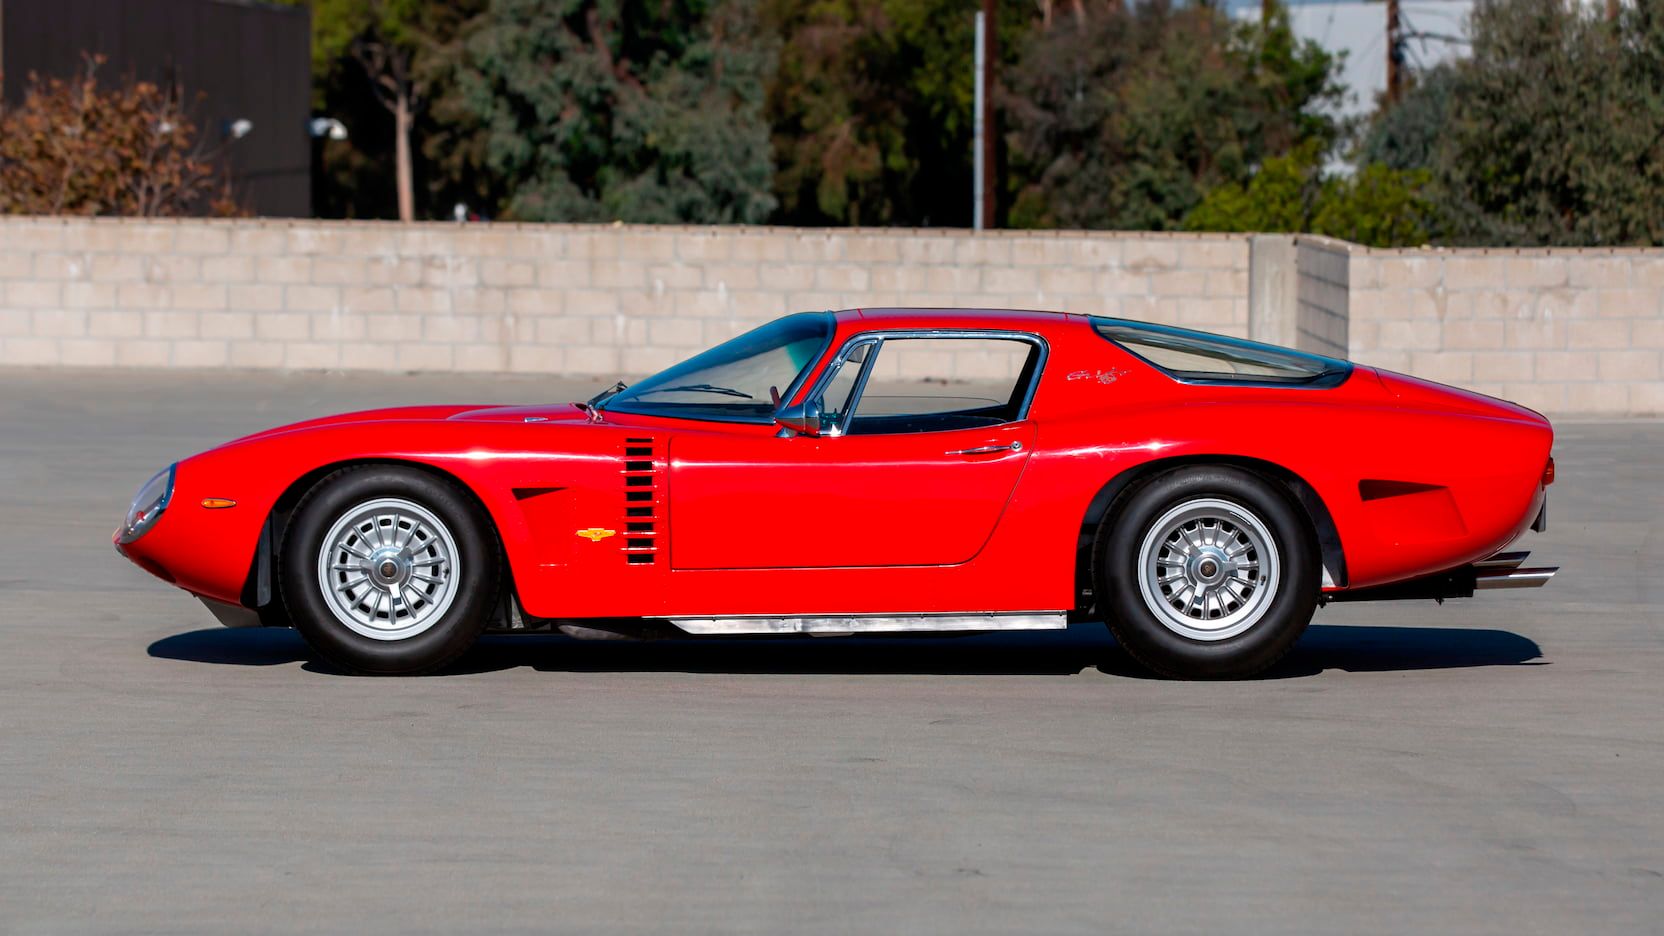 1965 Iso Grifo A3:C Bizzarrini, red, side, mirrors